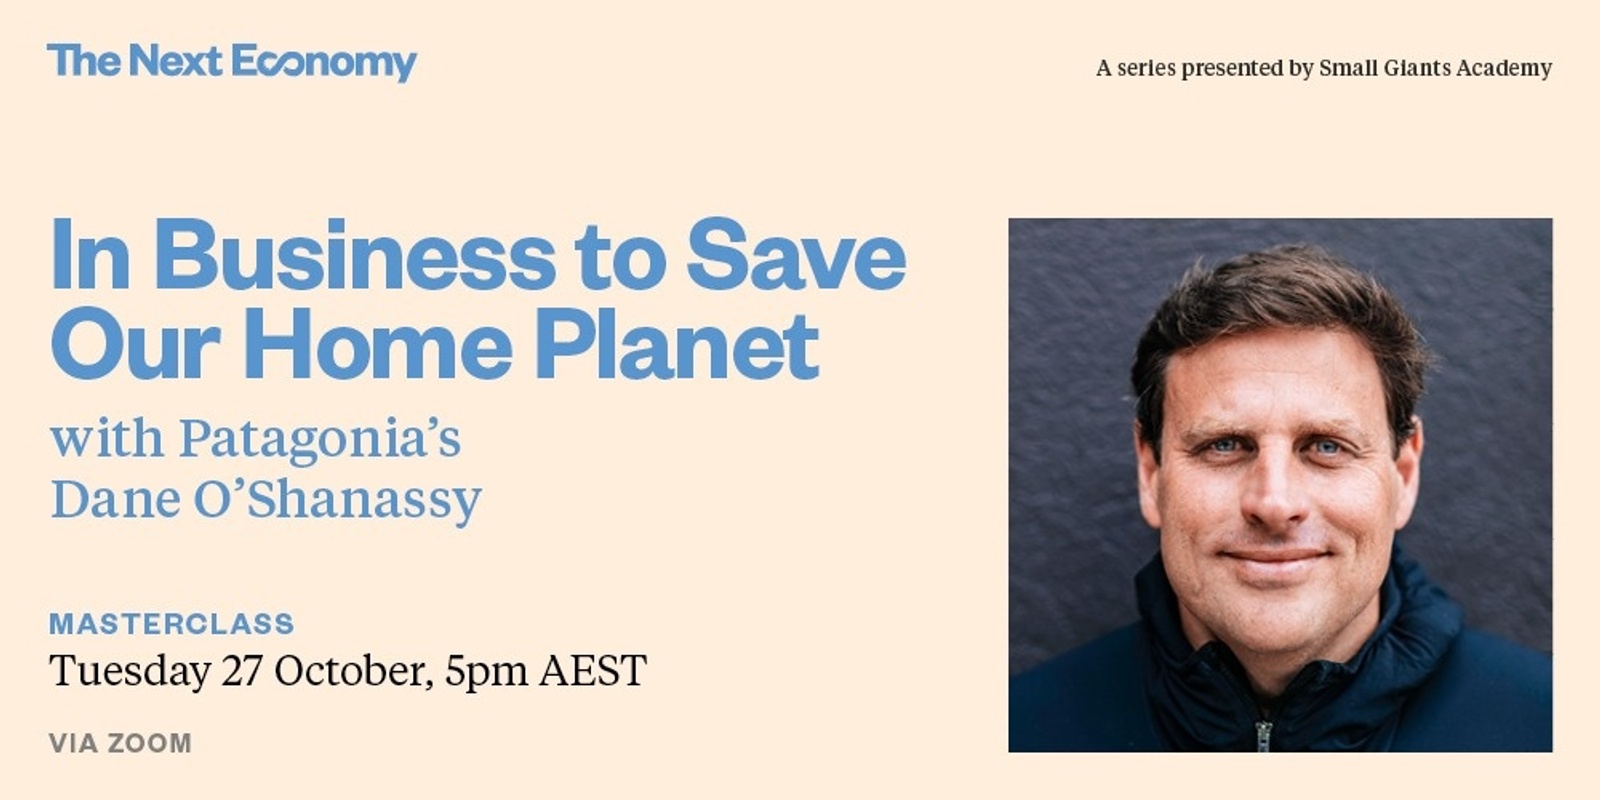 Masterclass: In Business to Save Our Home Planet with Dane O'Shanassy